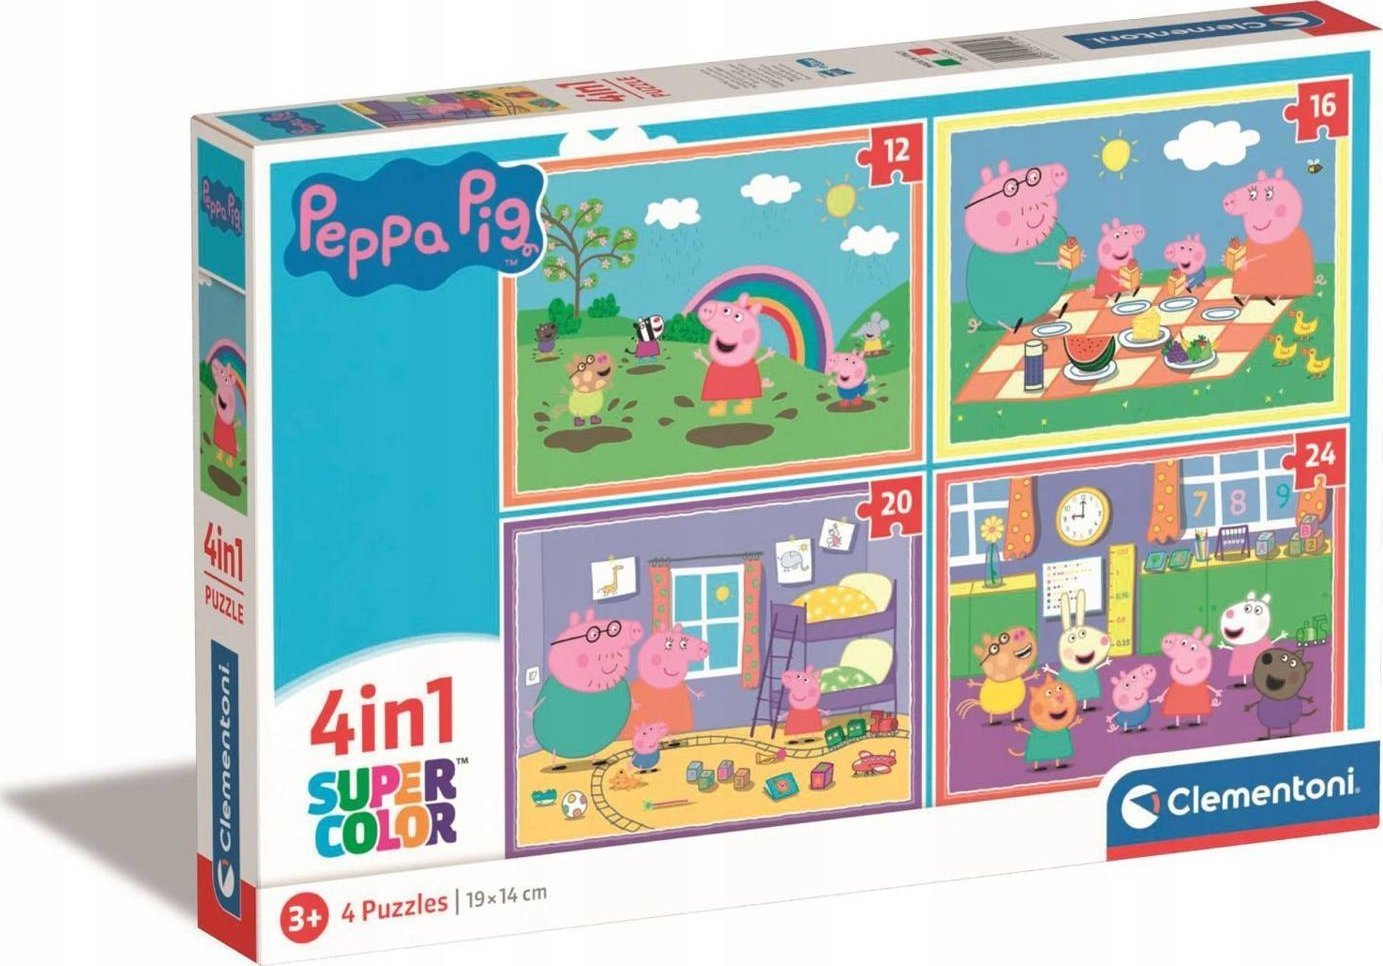 Clementoni CLE puzzle 4in1 SuperColor Peppa Pig 21516